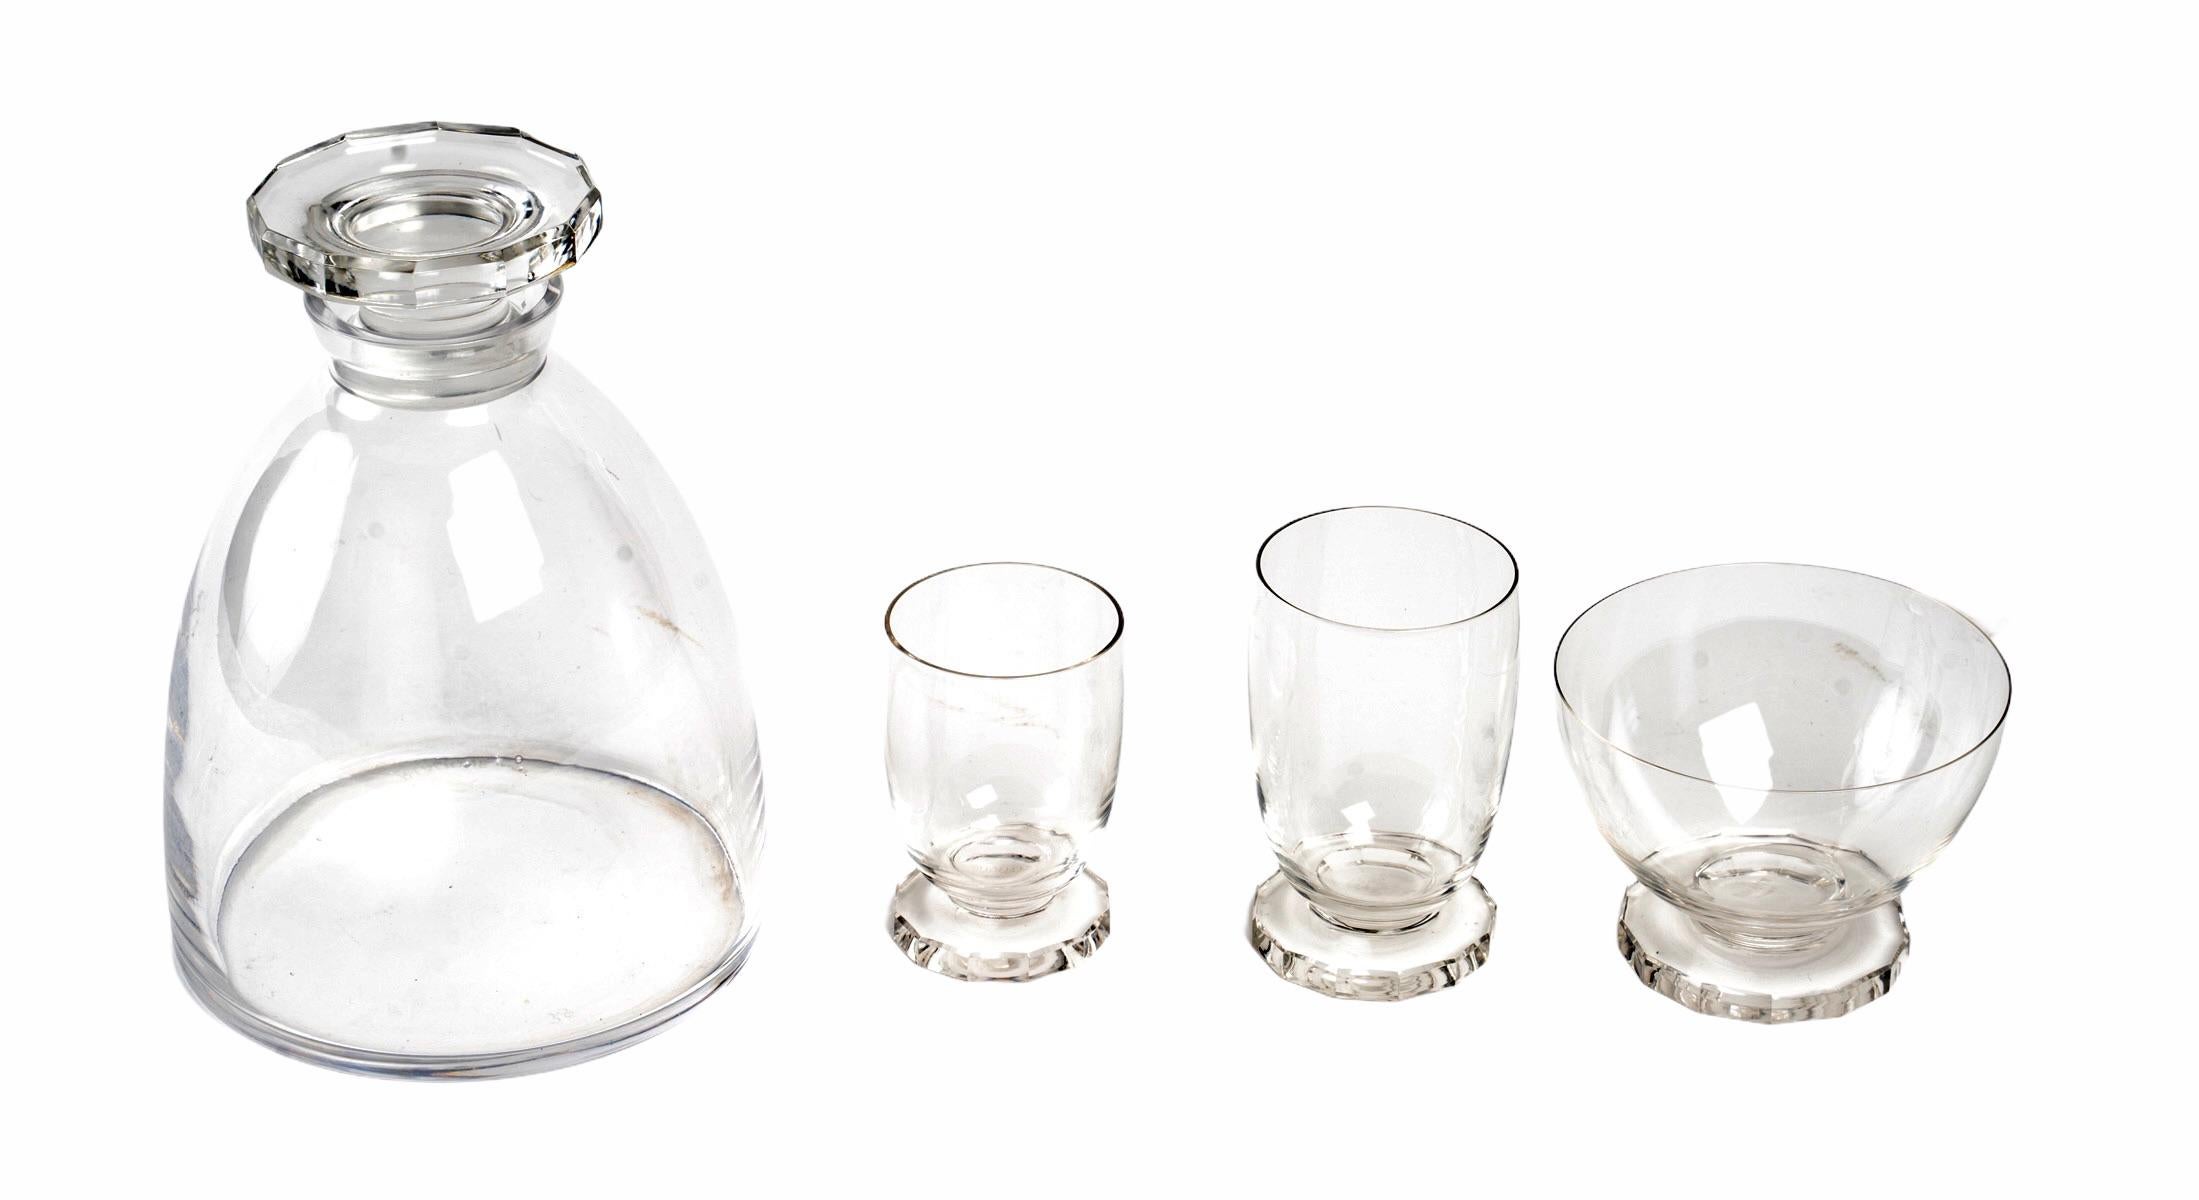 Set of 25 pieces: 24 drinking glasses, 1 decanter made by René Lalique in 1938. Model is named 